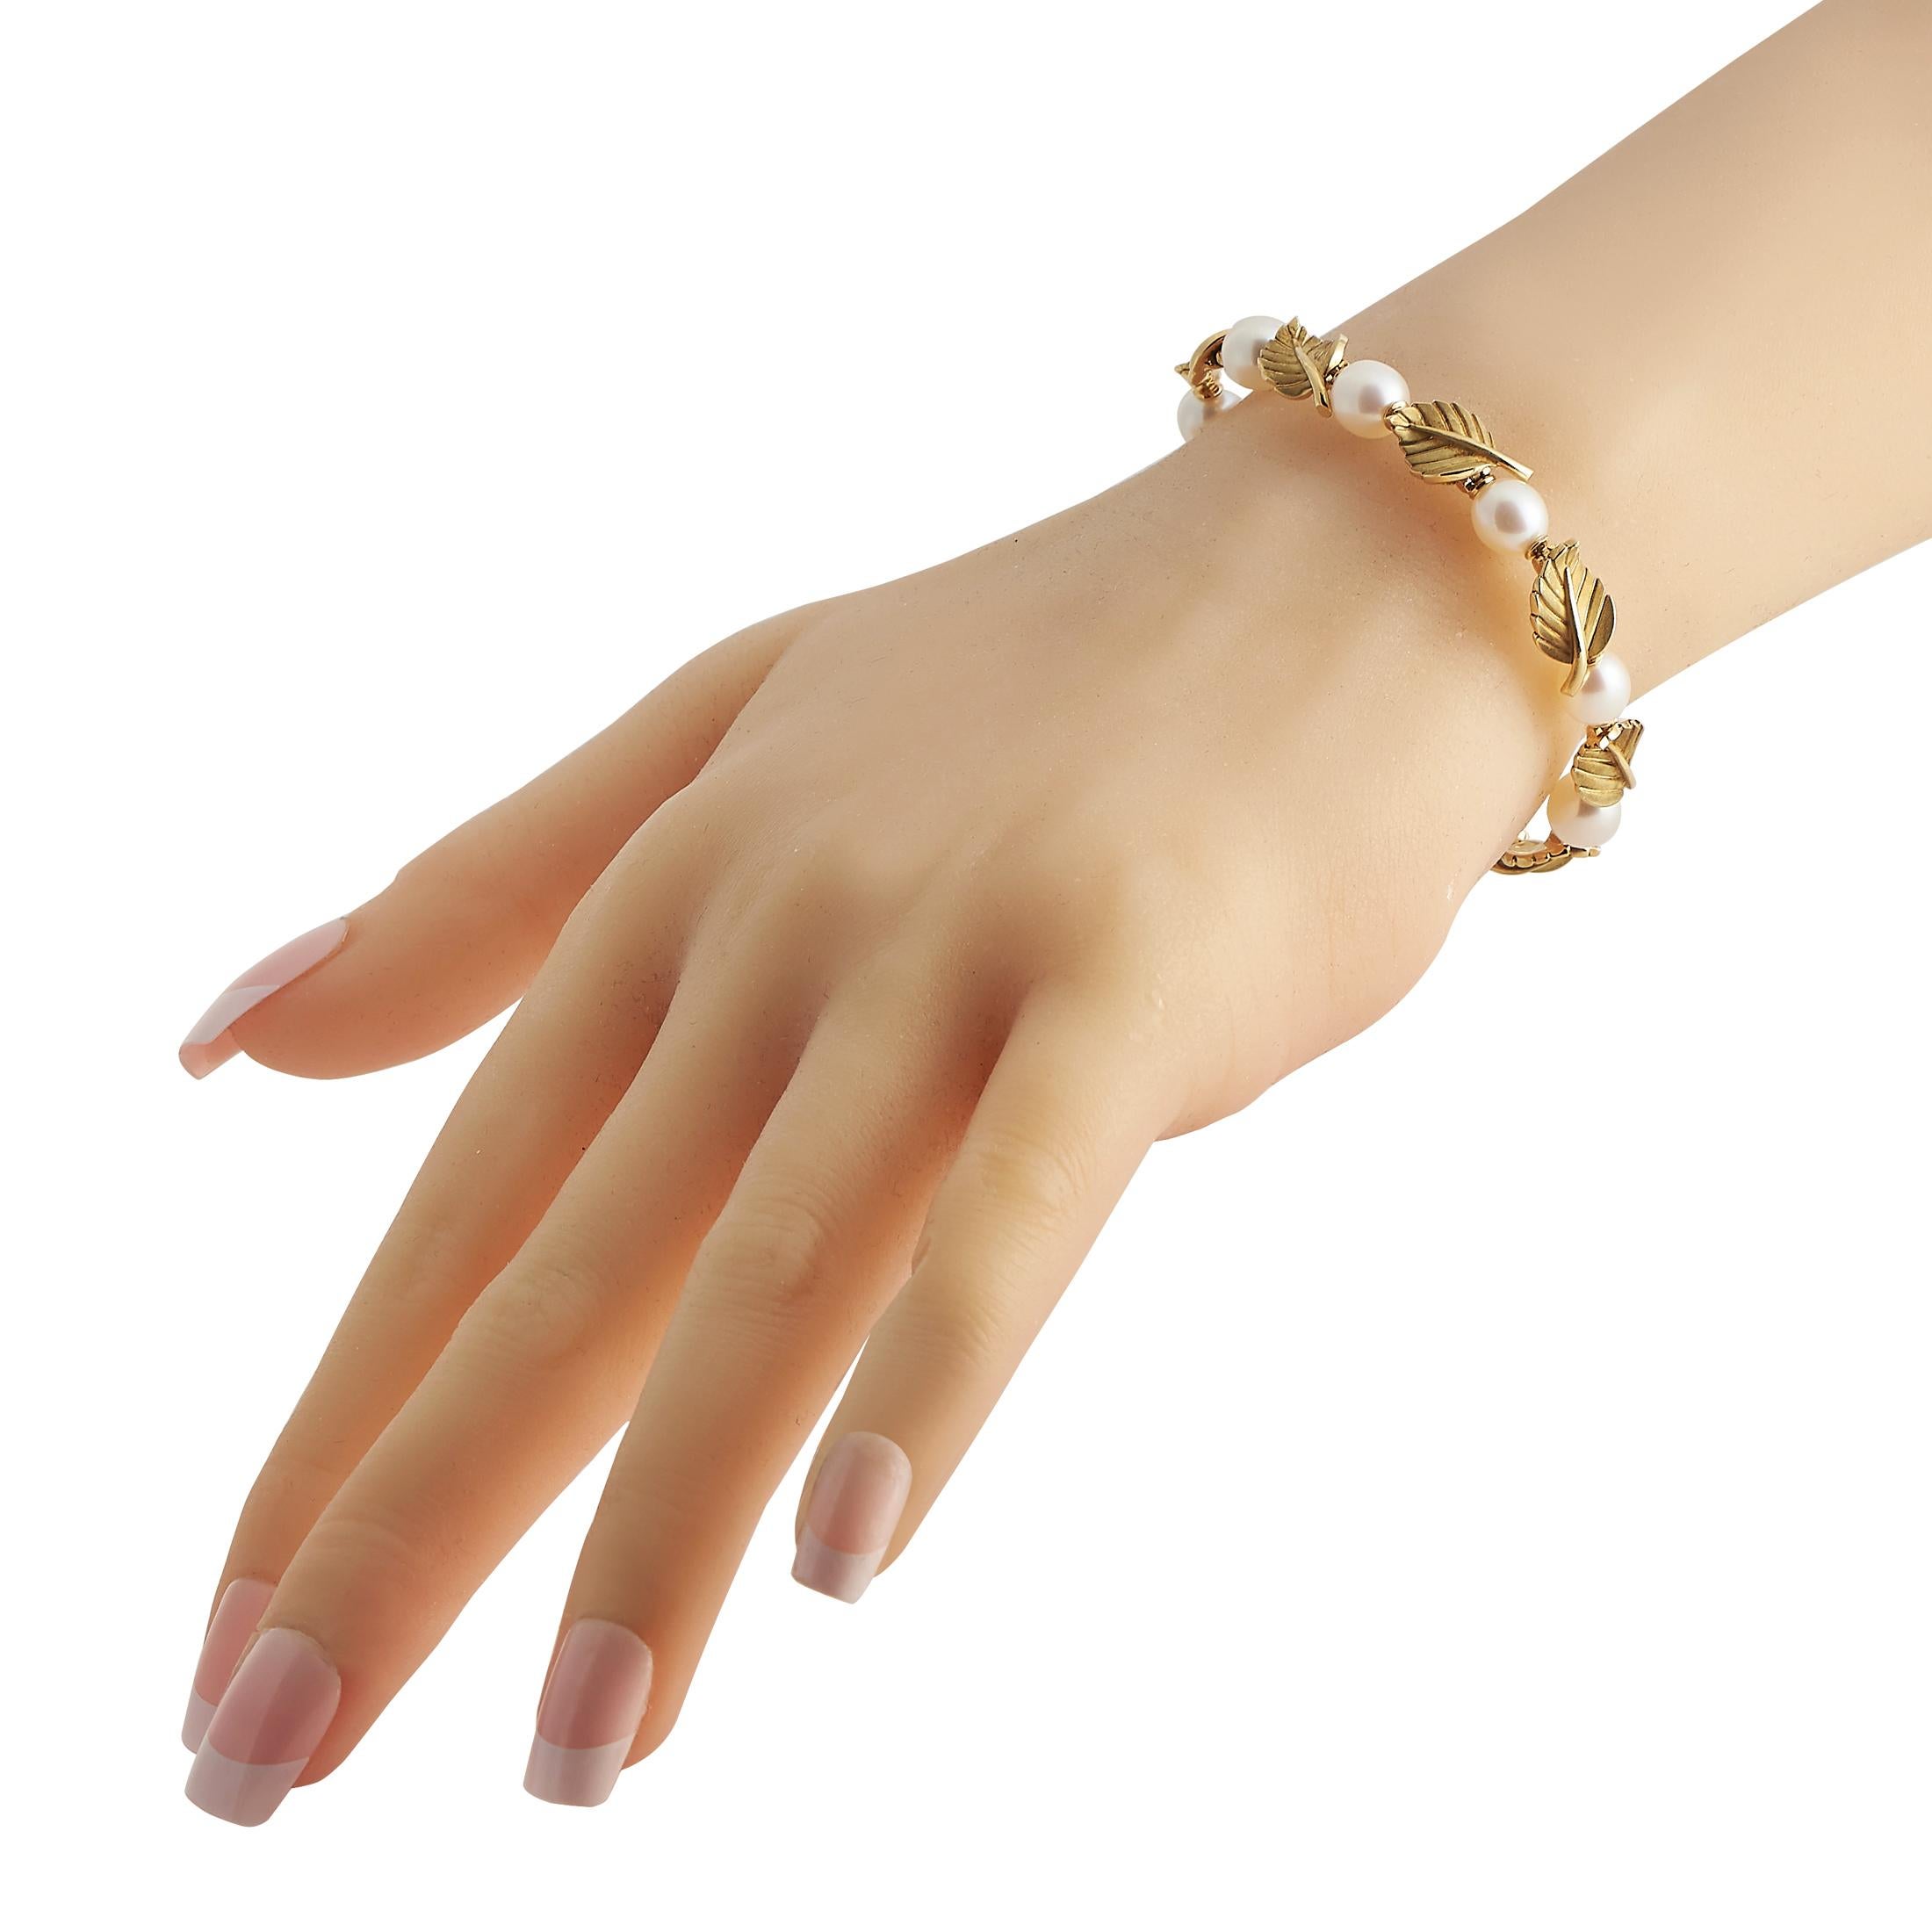 This Tiffany & Co. bracelet is nothing short of breathtaking. Opulent 18K Yellow Gold leaves alternate with stunning Pearl accents on this impeccable piece of jewelry, which measures 7.25